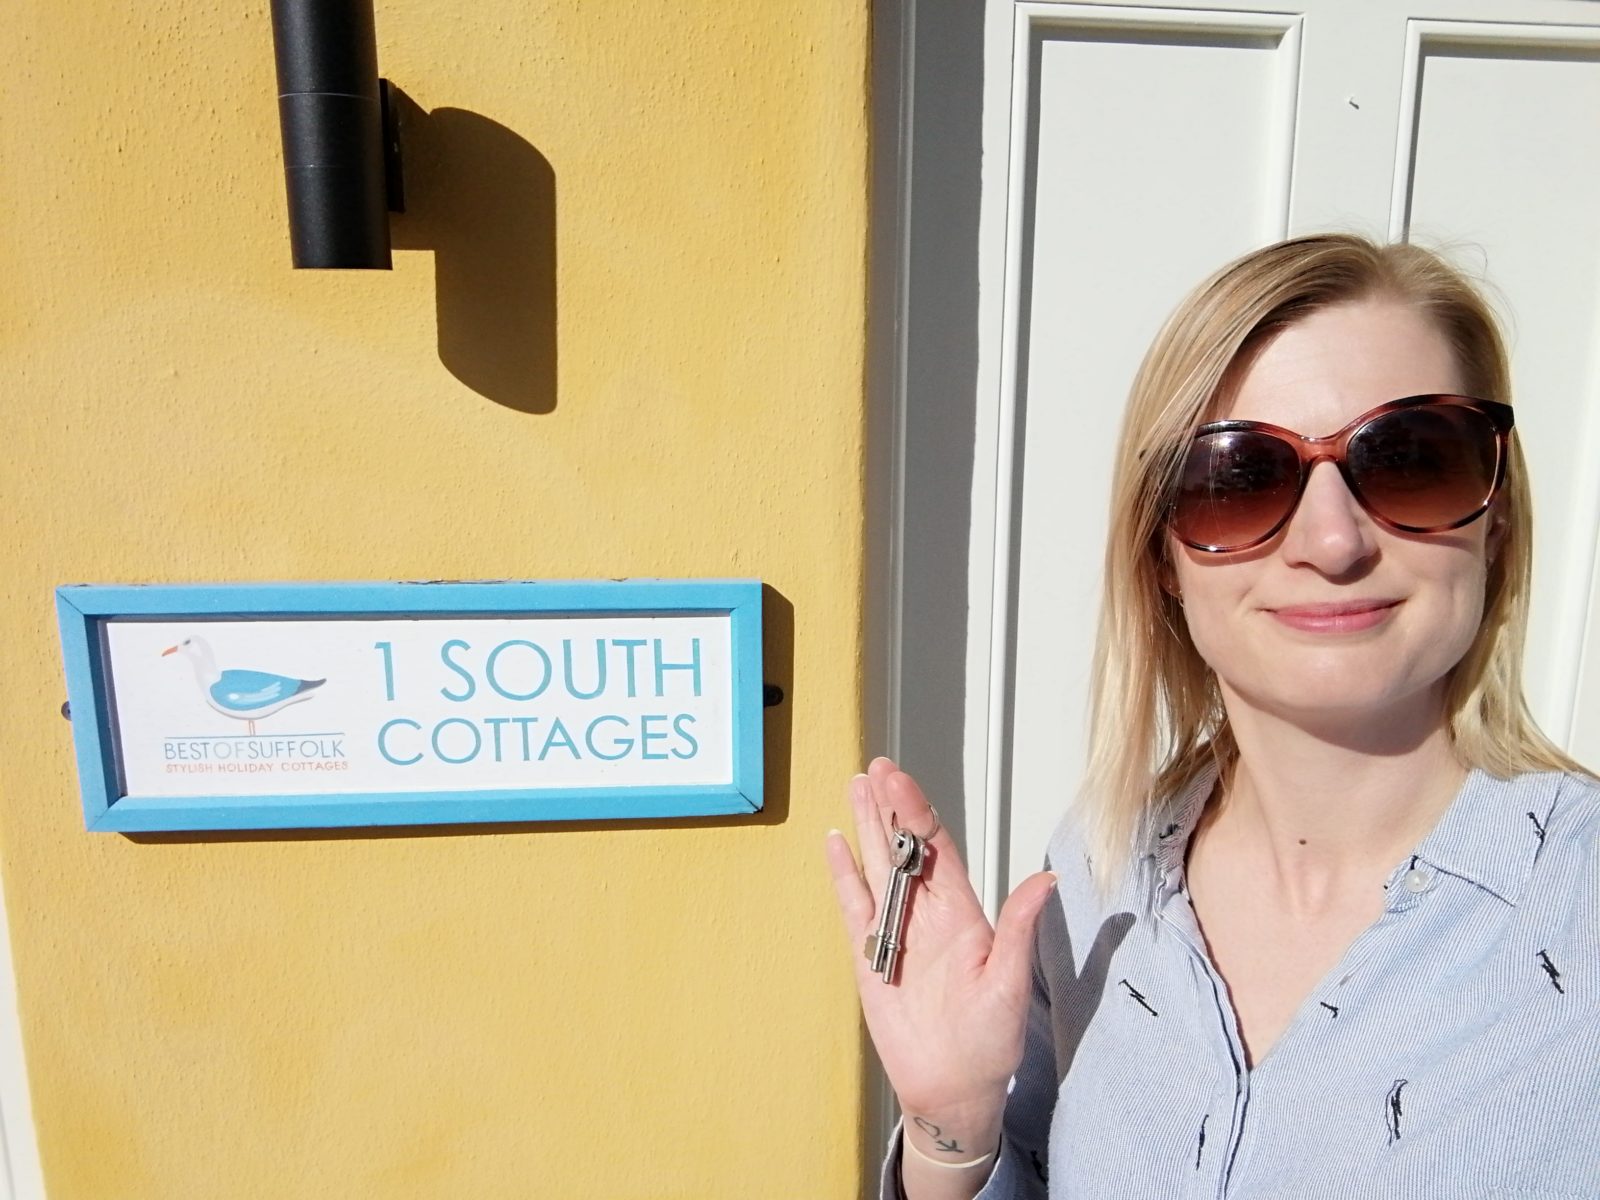 1 South Cottages Abi with Keys 